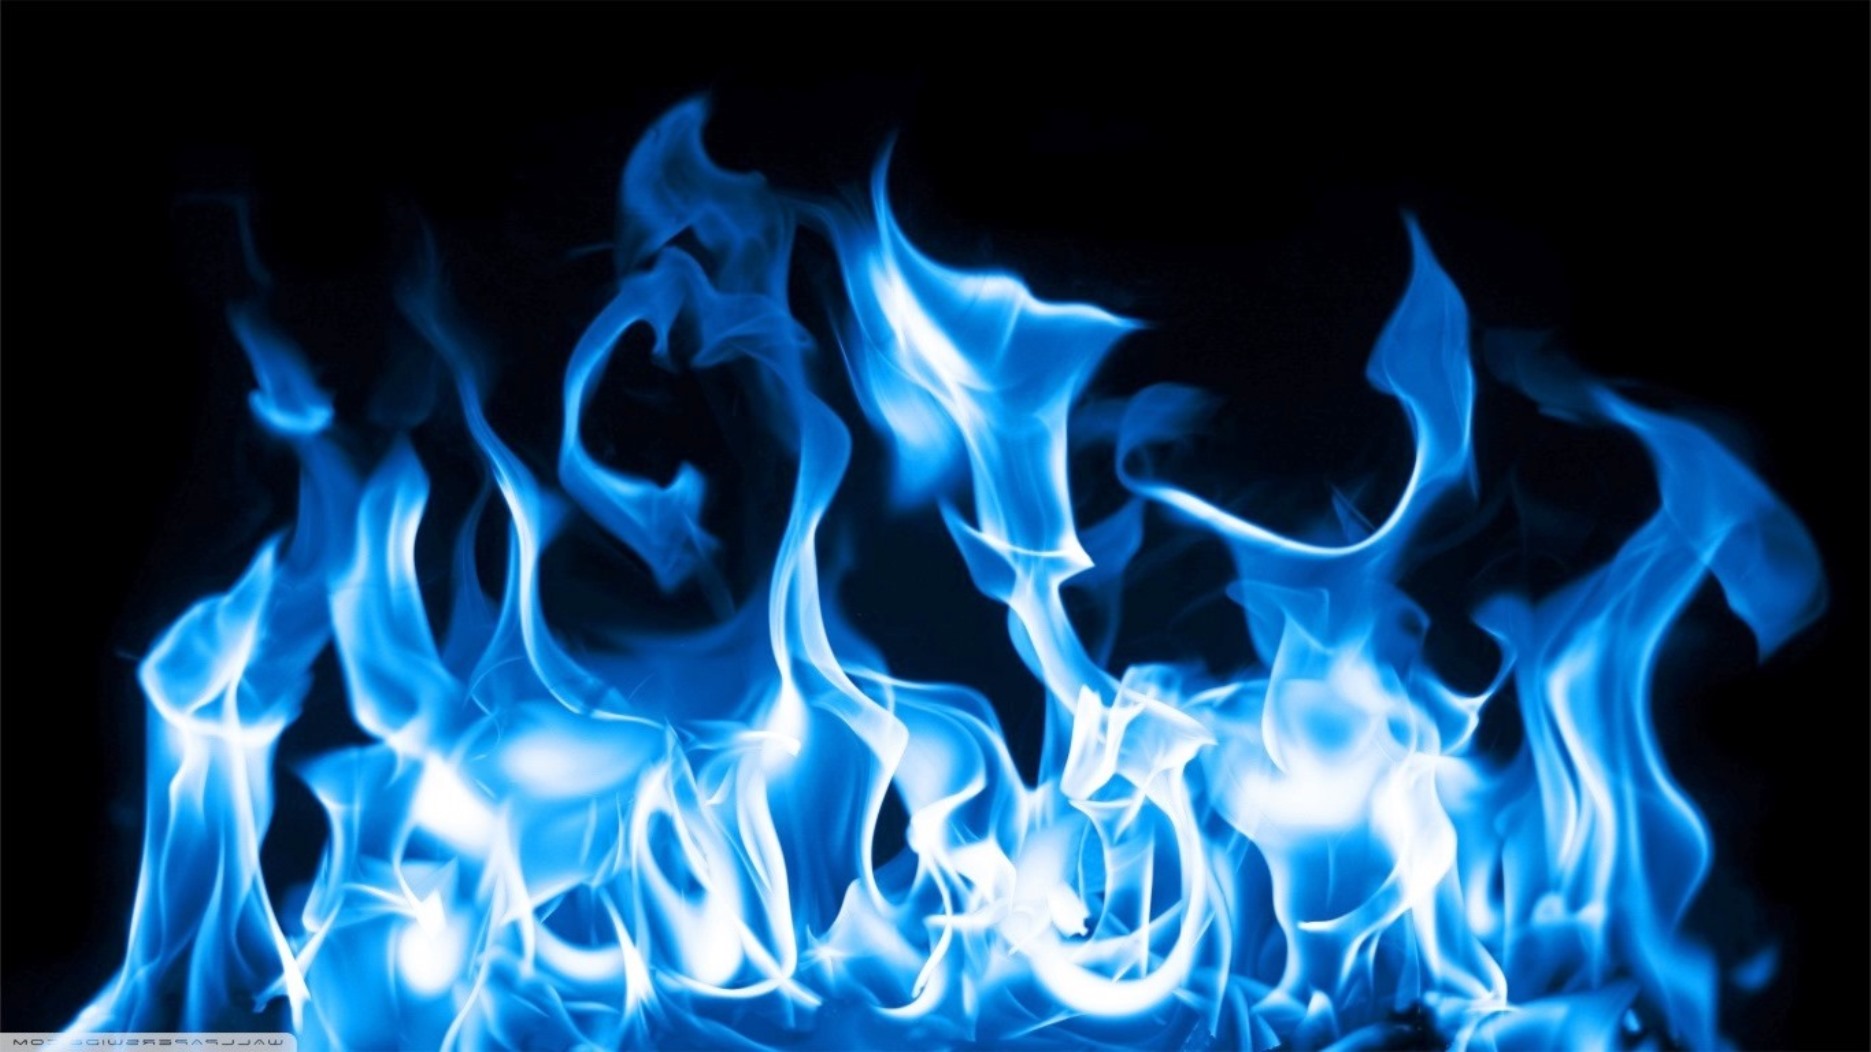 Blue Fire Wallpapers, Full HDQ Blue Fire Pictures and Wallpapers ...